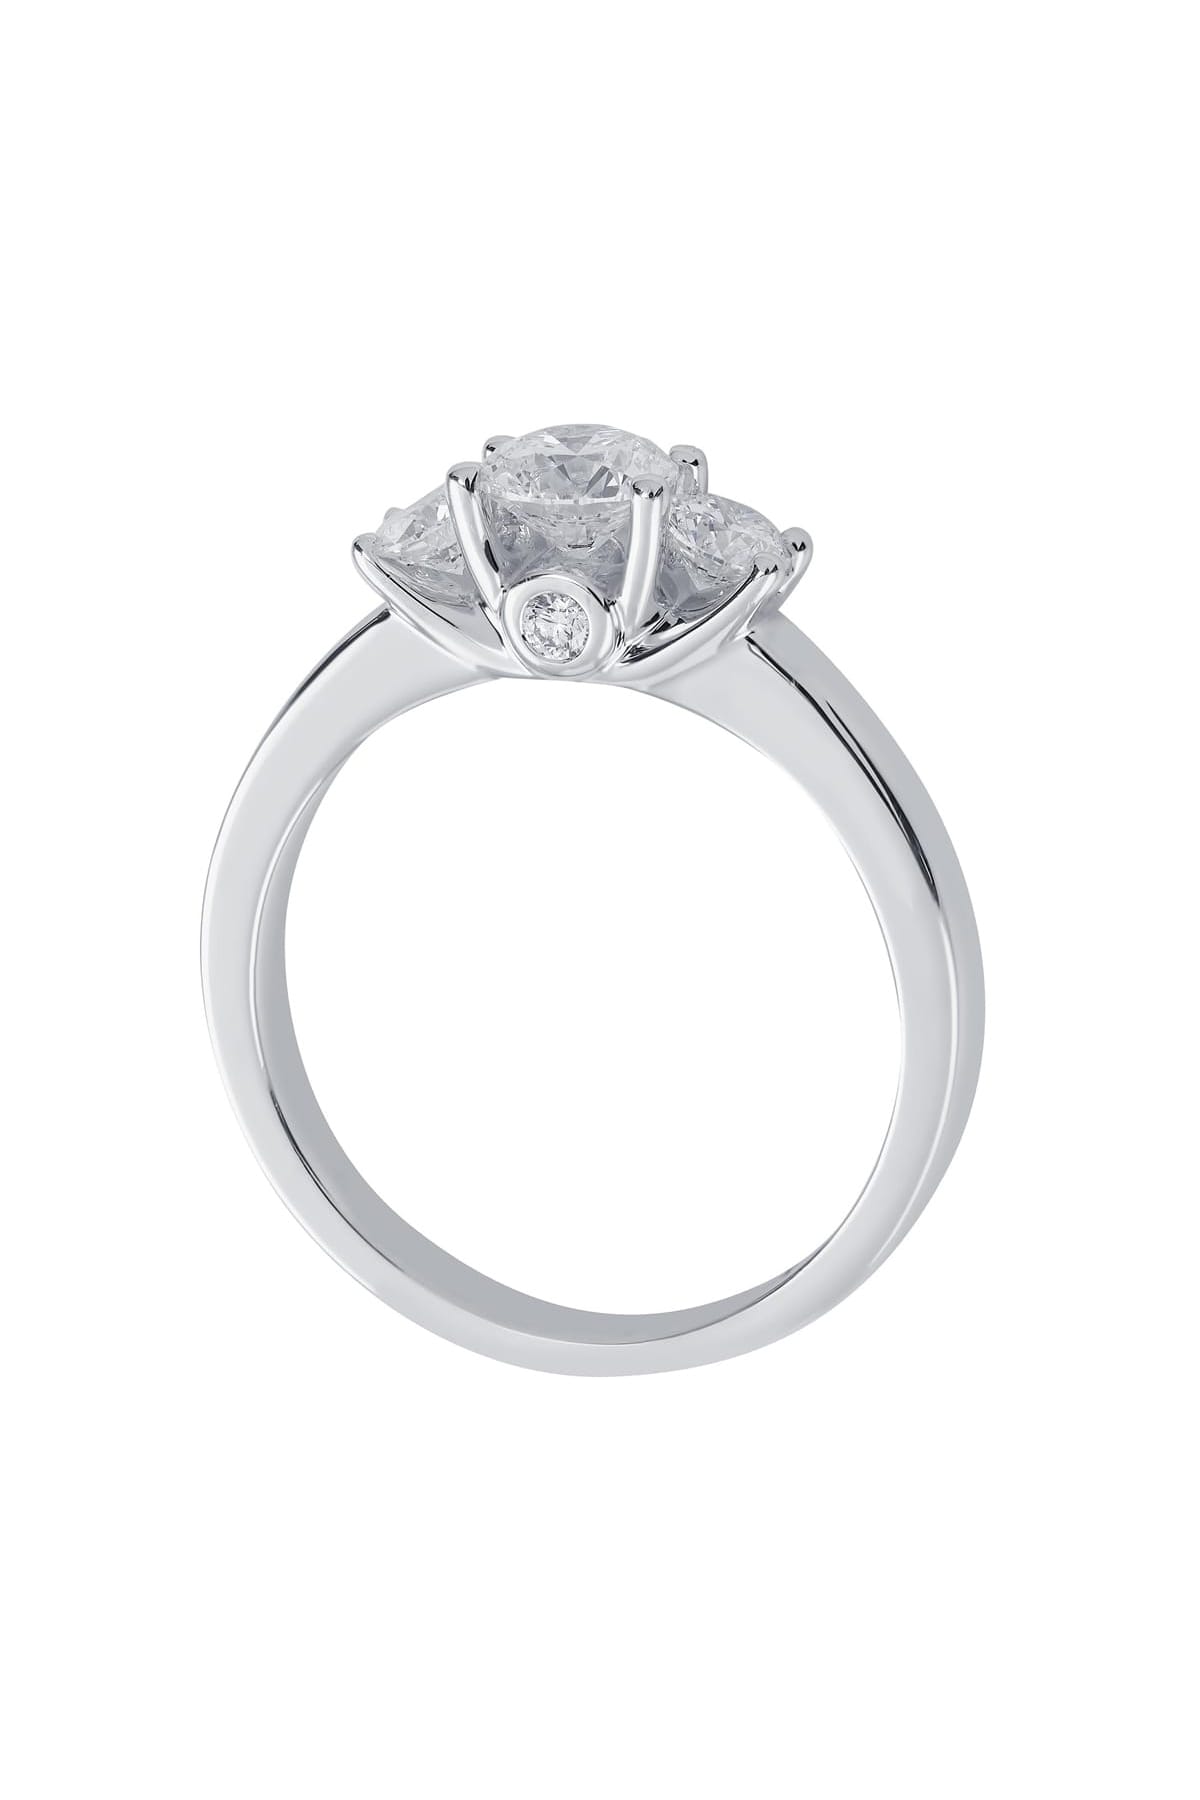 3 Stone Ring set in 18ct White Gold available at LeGassick Diamonds and Jewellery Gold Coast, Australia.